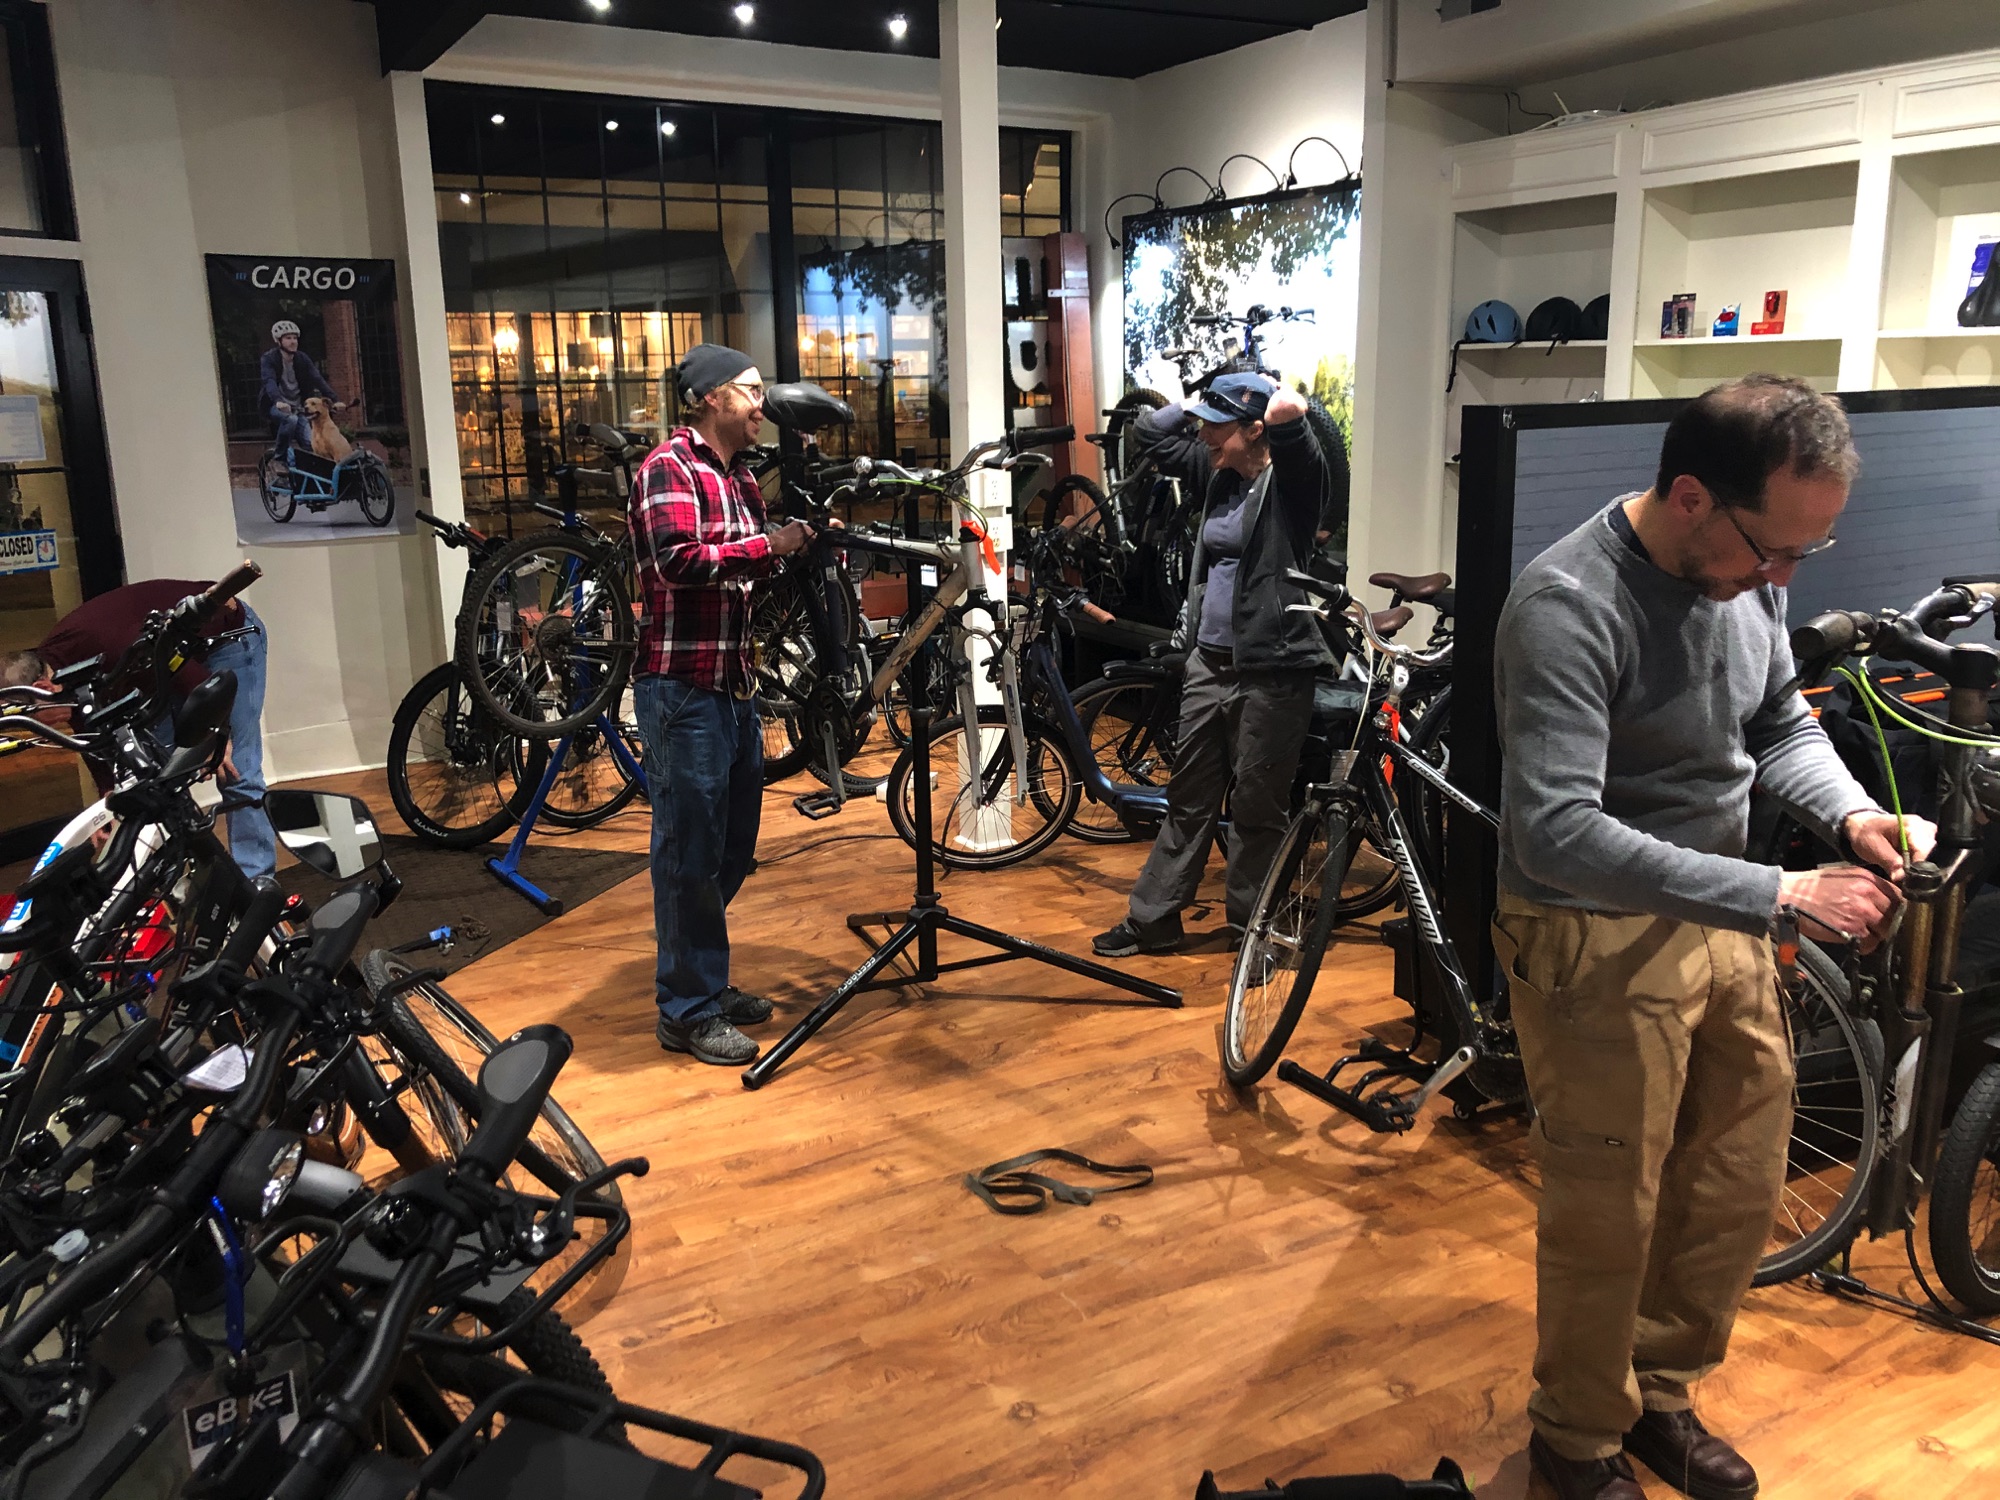 Bicycling in Greensboro Workshop at eBike Central